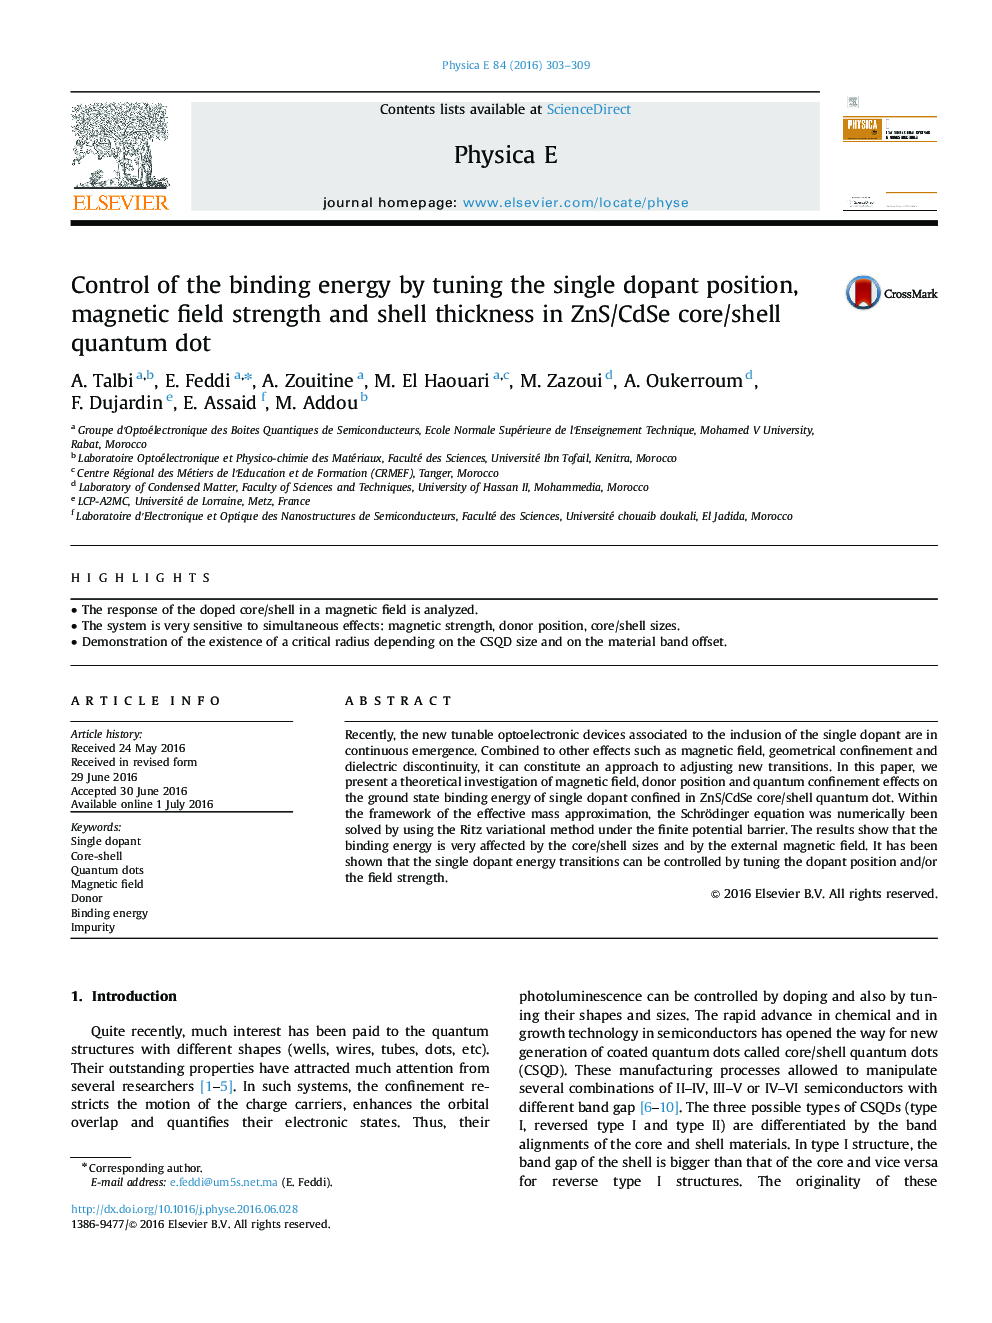 Control of the binding energy by tuning the single dopant position, magnetic field strength and shell thickness in ZnS/CdSe core/shell quantum dot